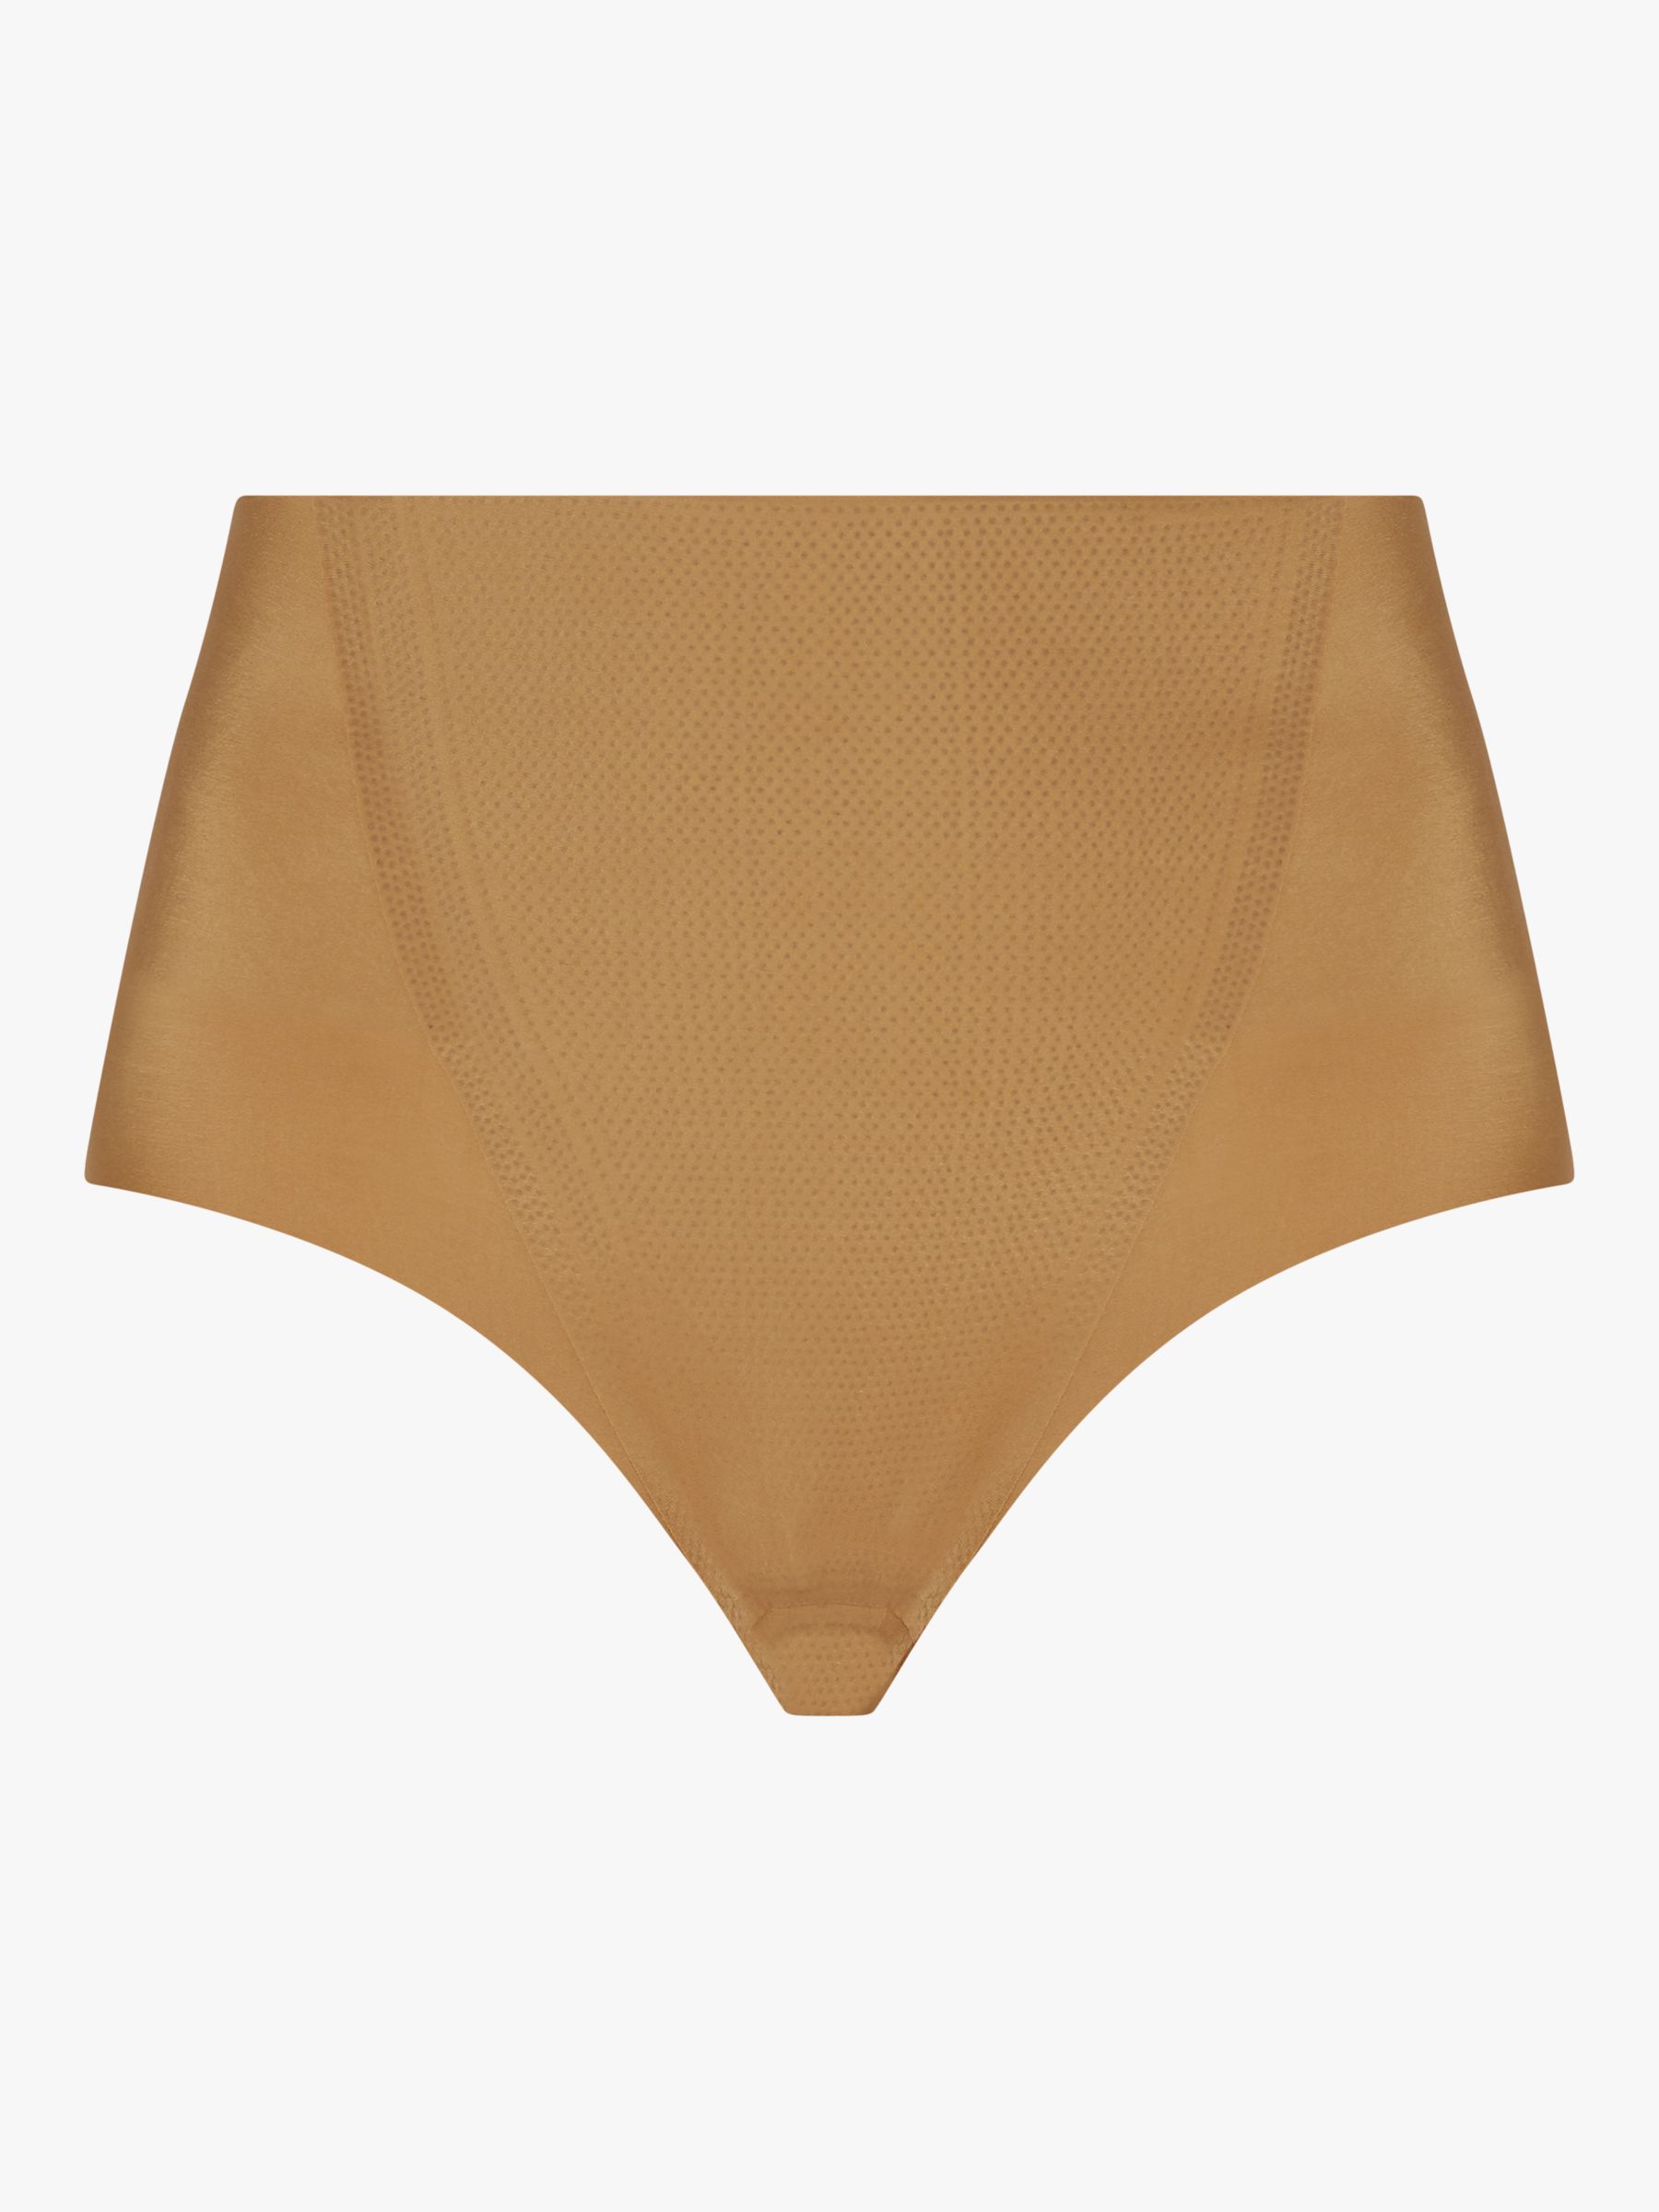 Buy Commando Zone Smoothing Seamless Thong Online at johnlewis.com